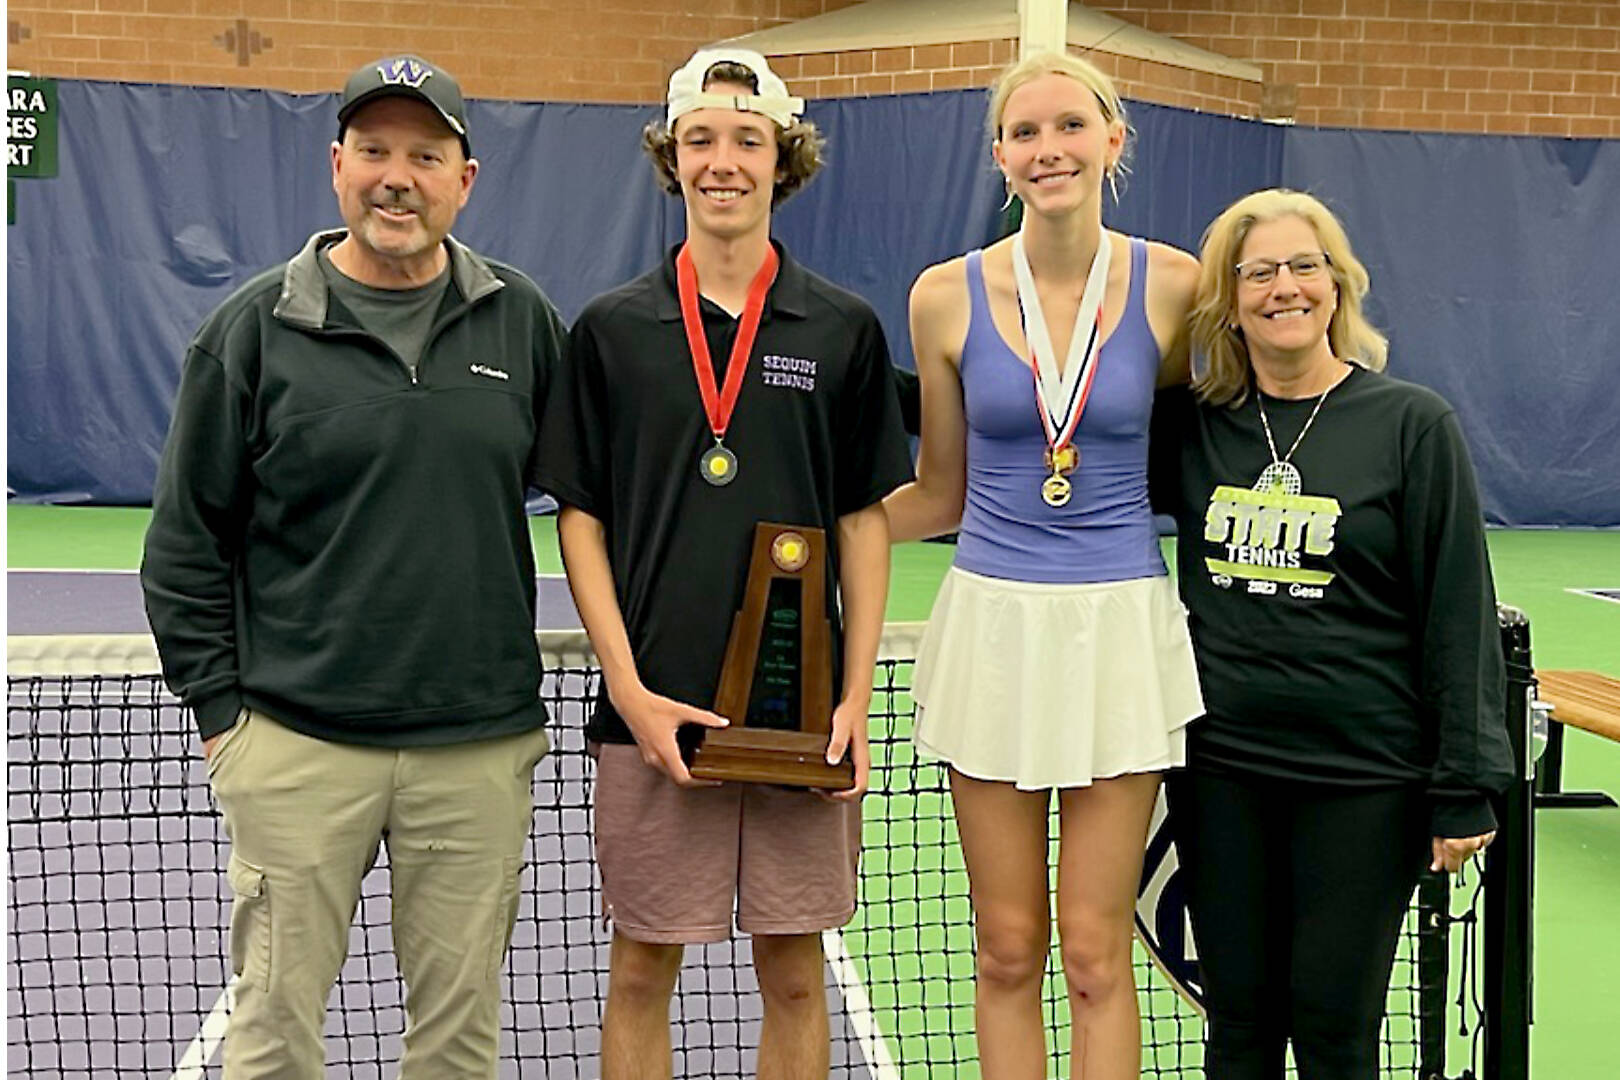 Sequim tennis coach Mark Textor, left celebrates Sequim’s two high finishes at state second-place boys’ finisher Garrett Little and third-place girls’ finisher Kendall Hastings. Assistant coach Andrea Dietzman is at the right. (Courtesy photo).